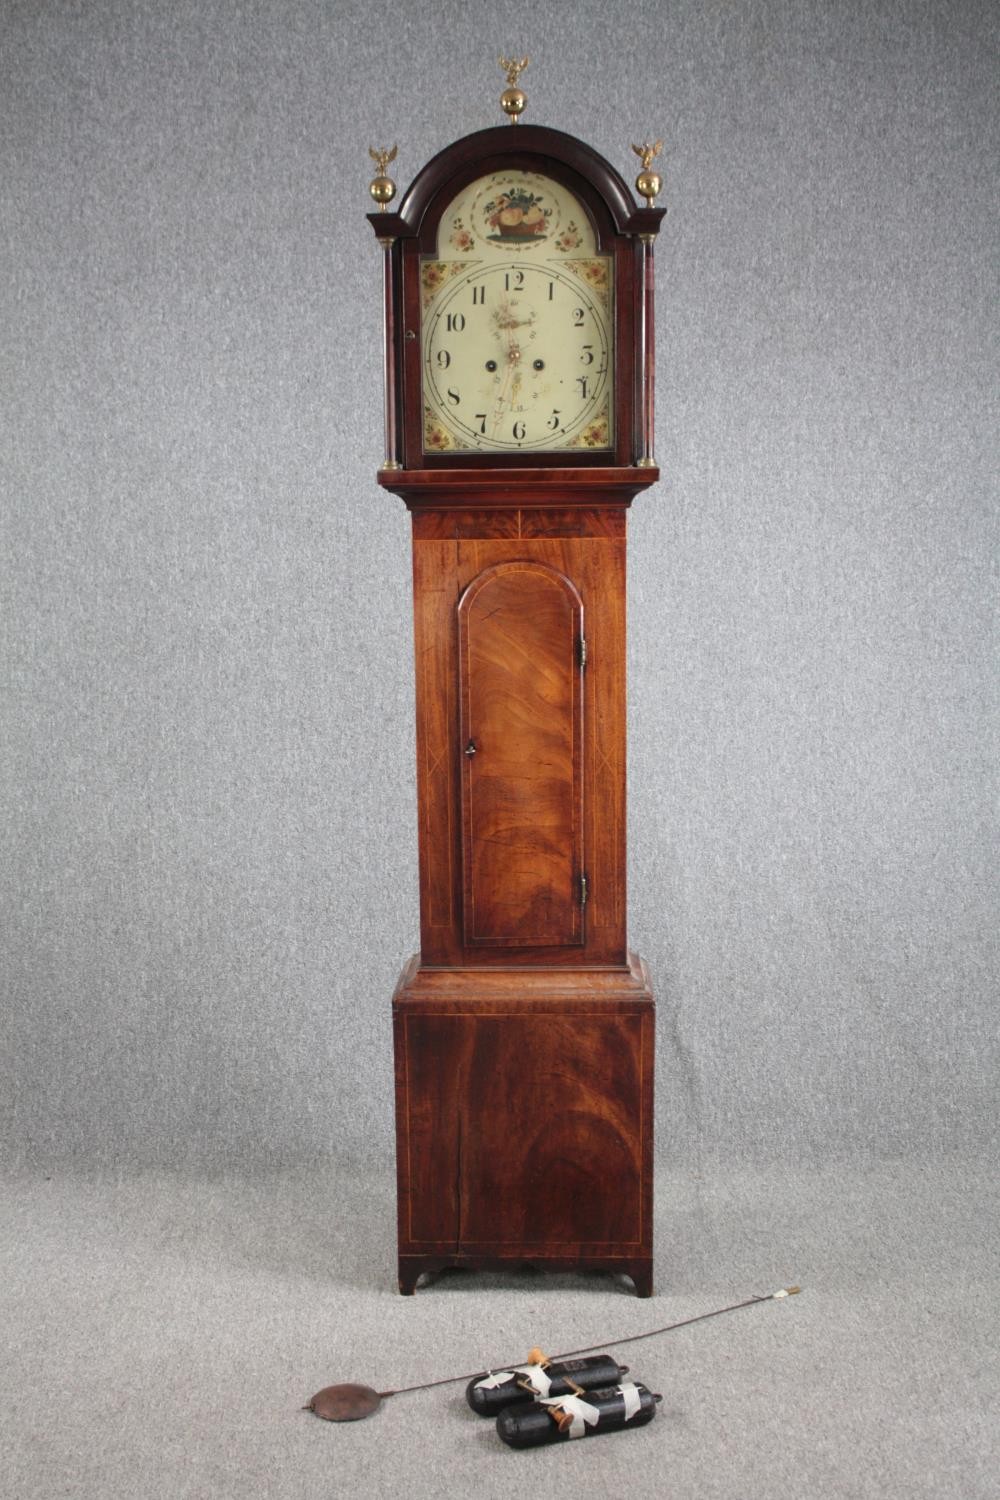 Longcase clock, Georgian mahogany and crossbanded case with satinwood string inlay, painted face and